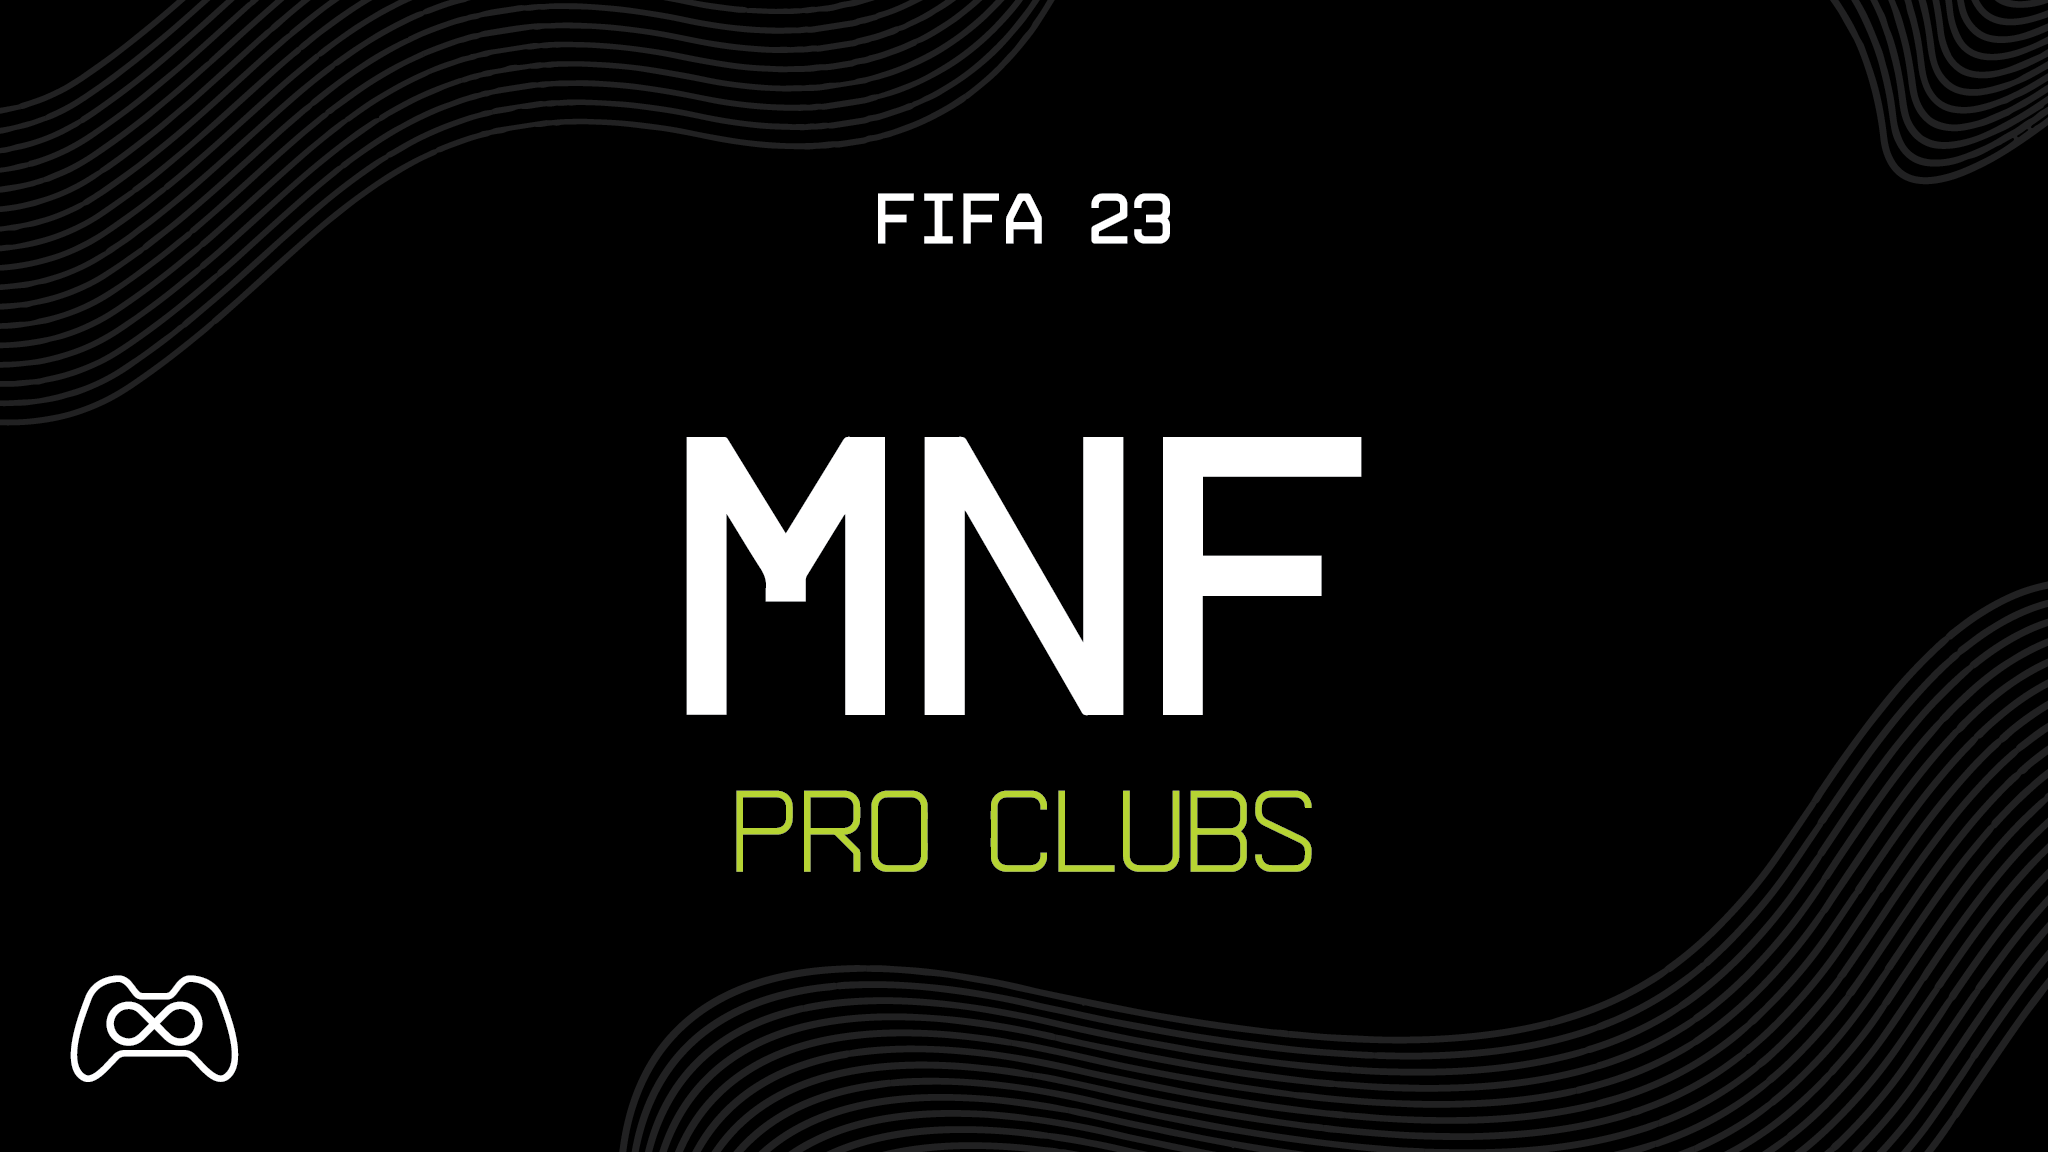 More information about "FG - Pro Clubs Mondays on FIFA 23!!"